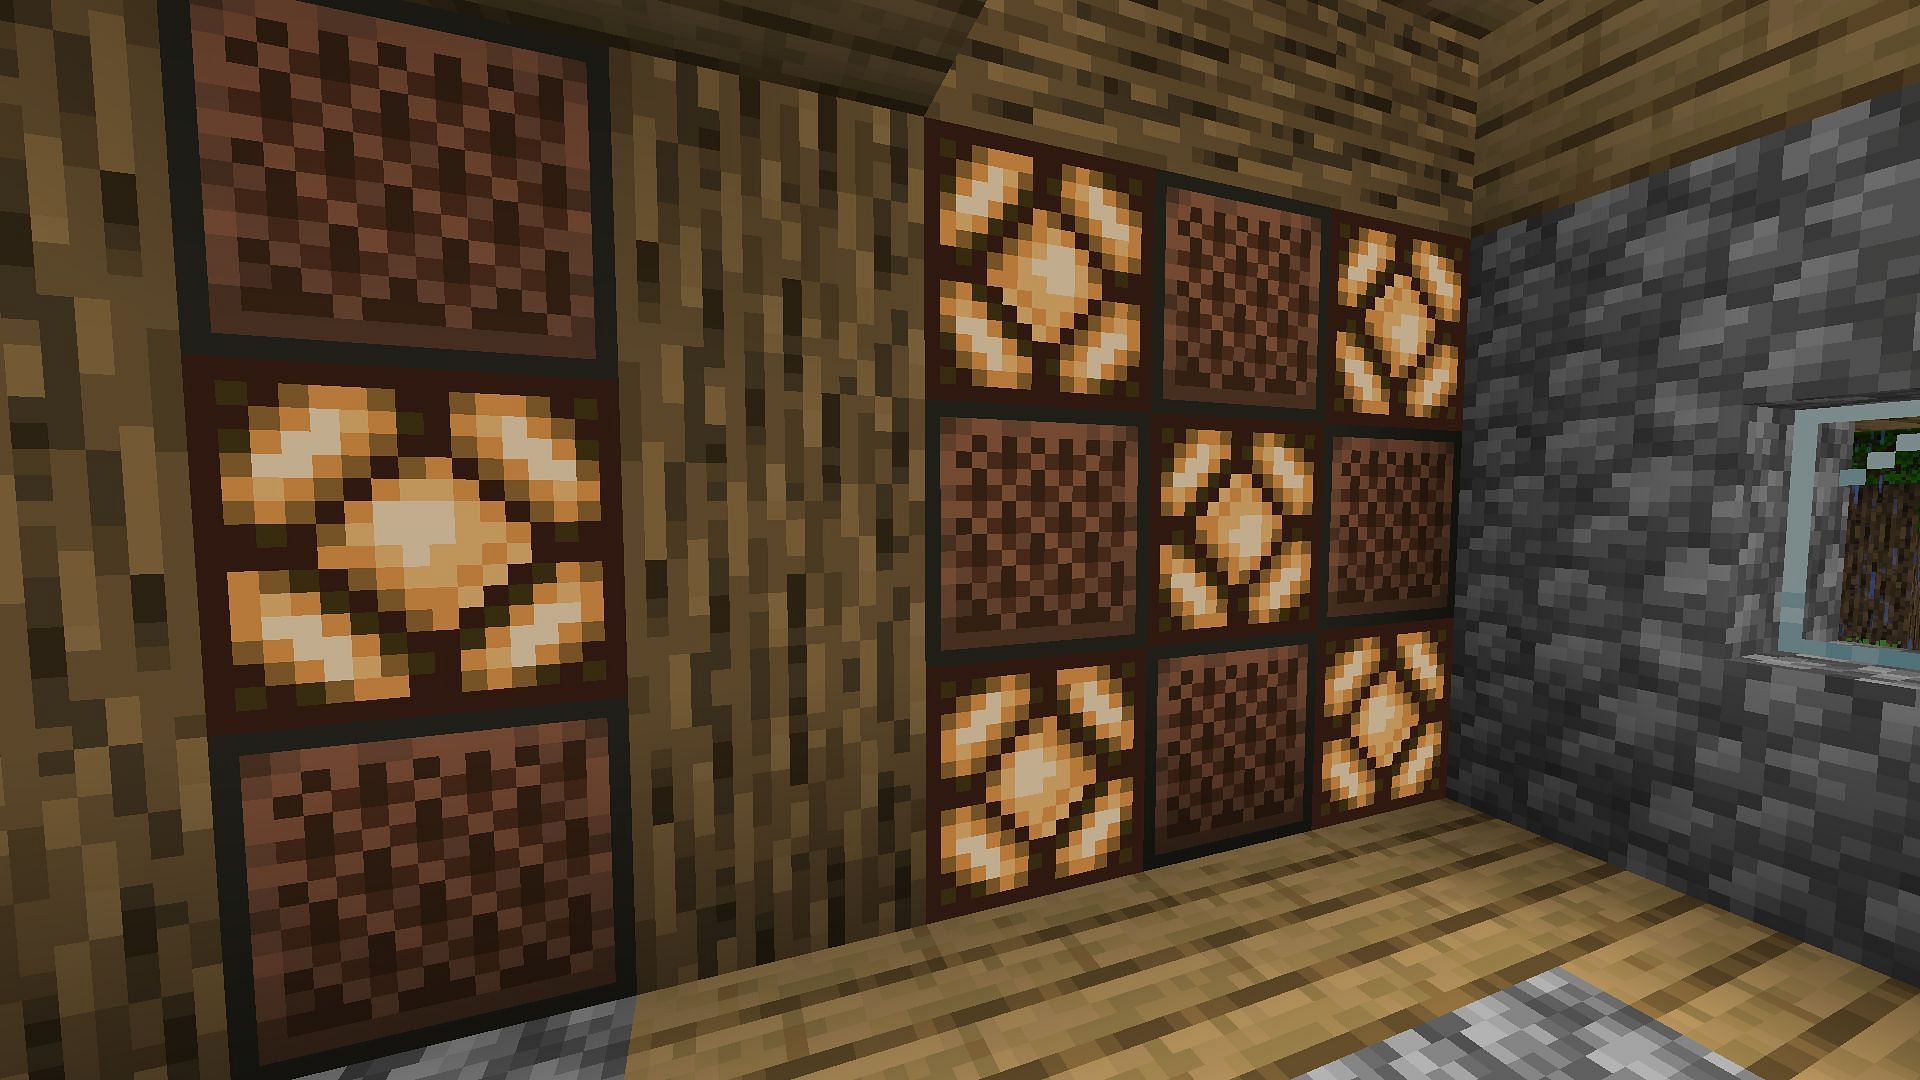 Redstone lamp can turn on automatically at night with daylight sensor in Minecraft (Image via Mojang)